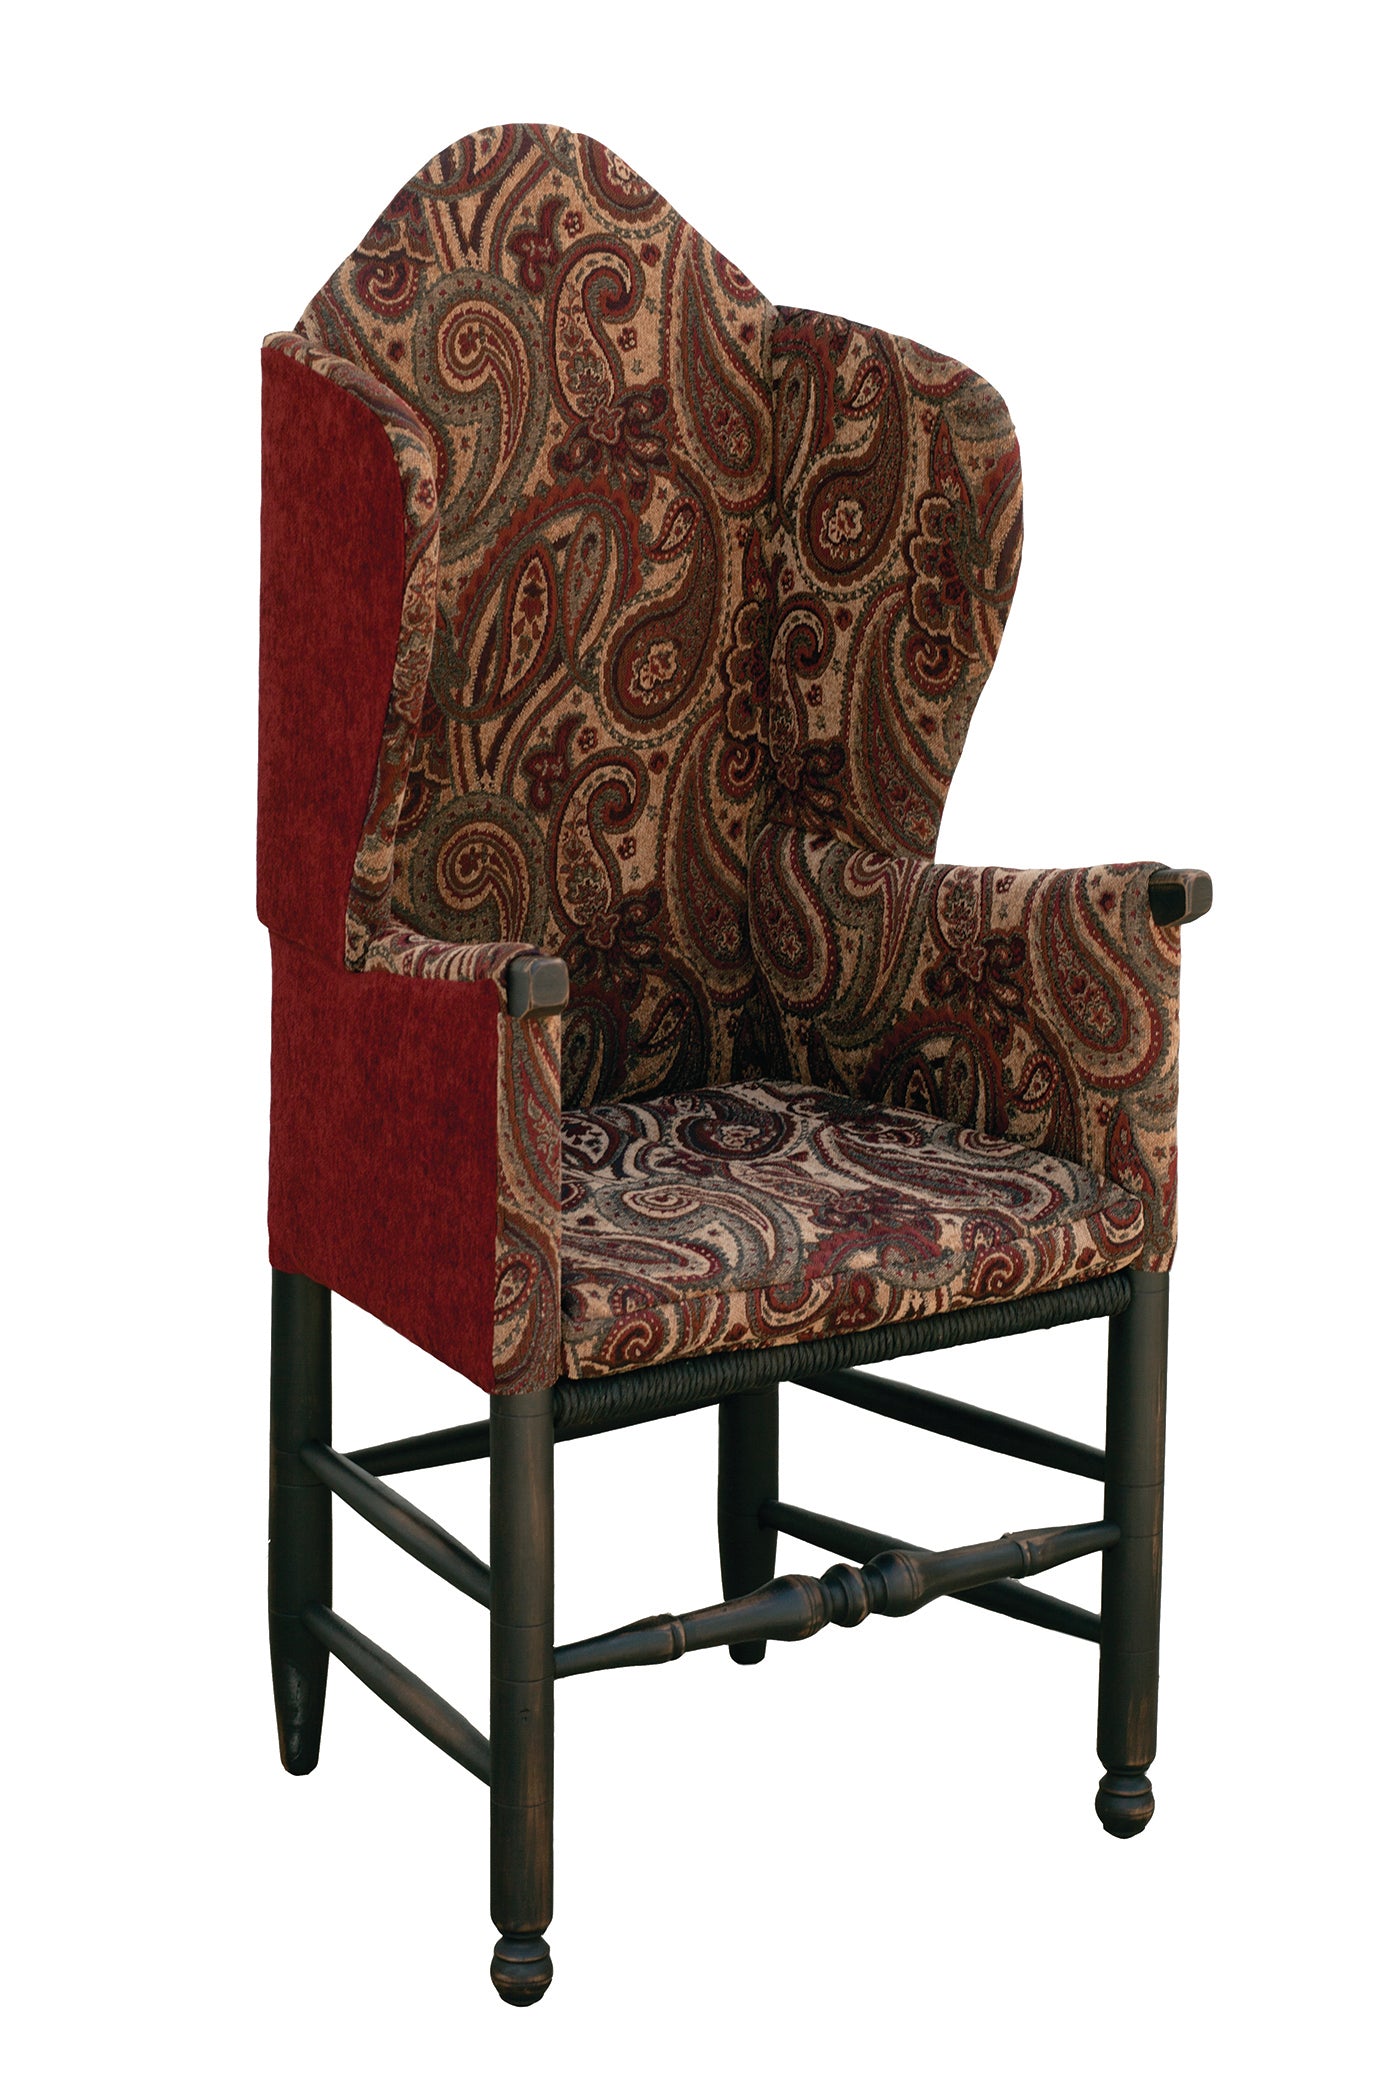 Make Do Wing Chair